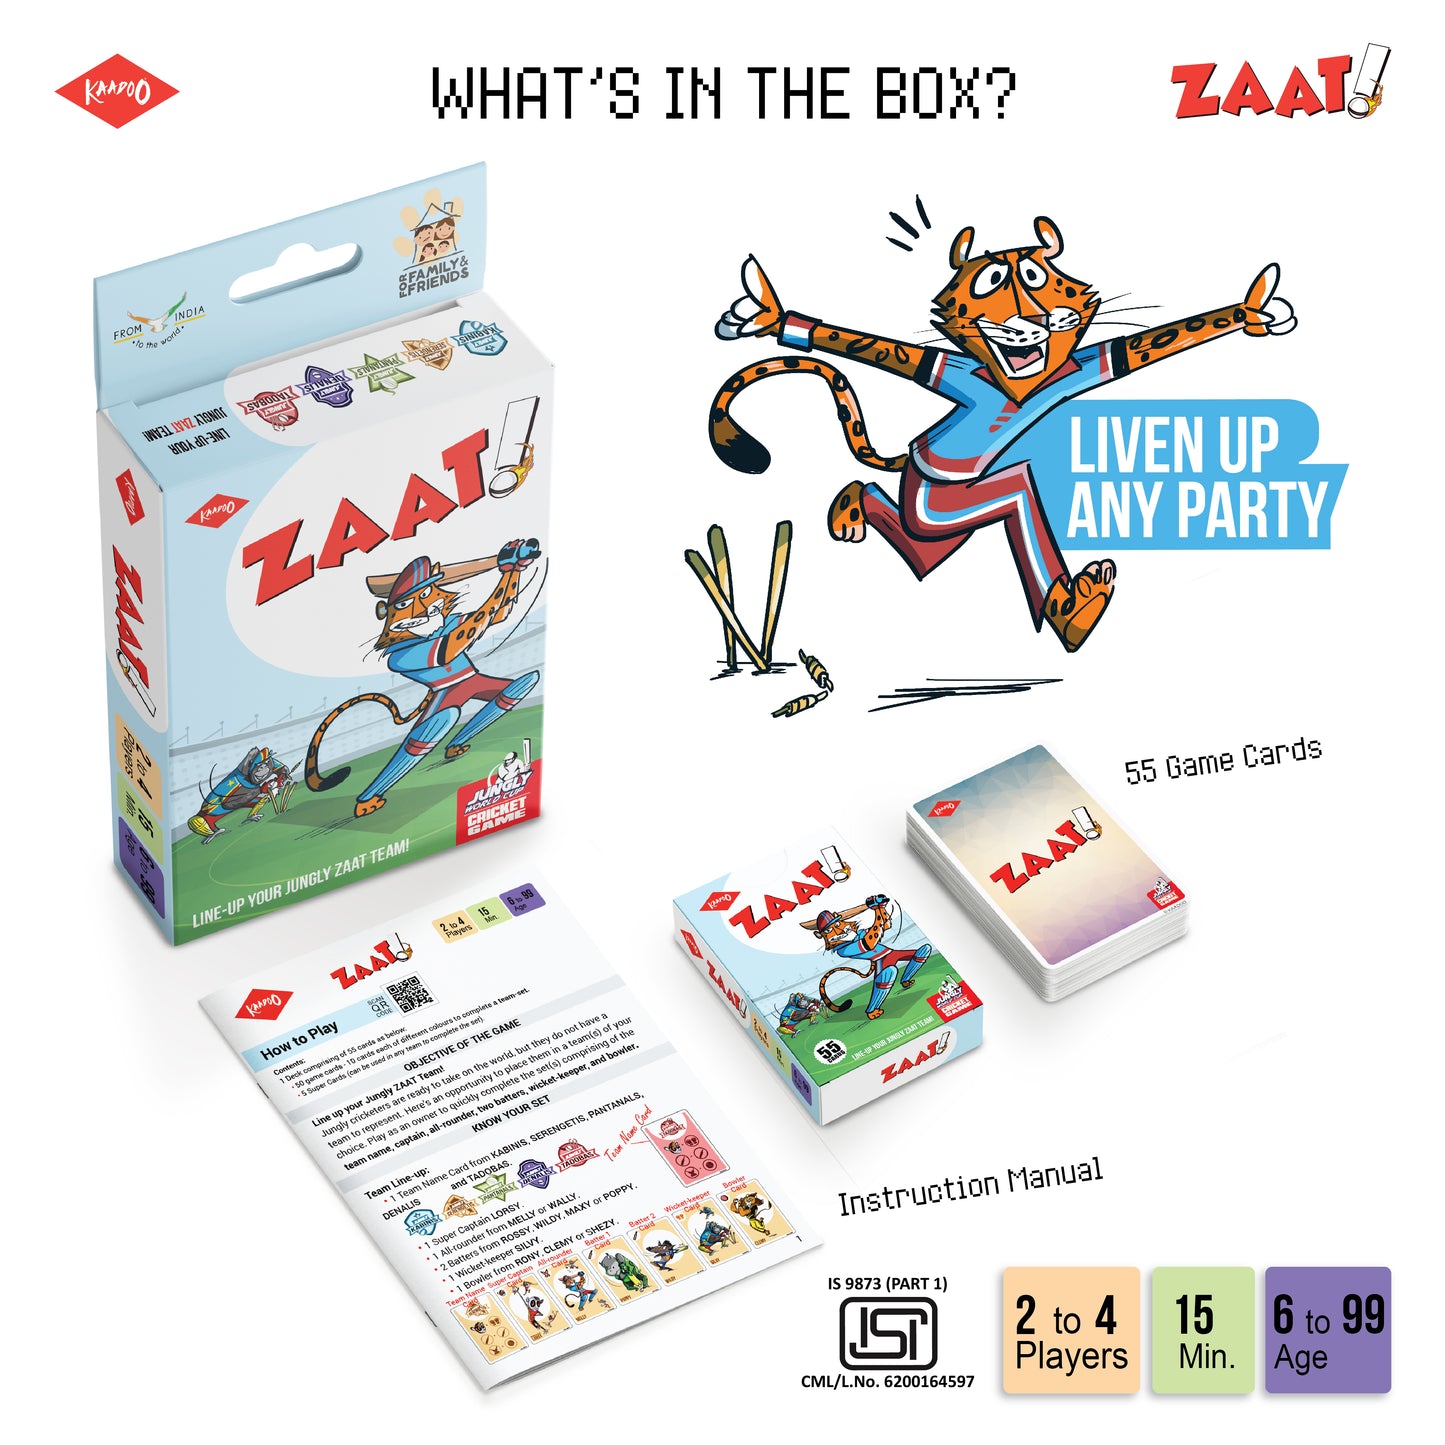 ZAAT! Card Game - Line-Up Your JUNGLY ZAAT Team! (Pack of 10)